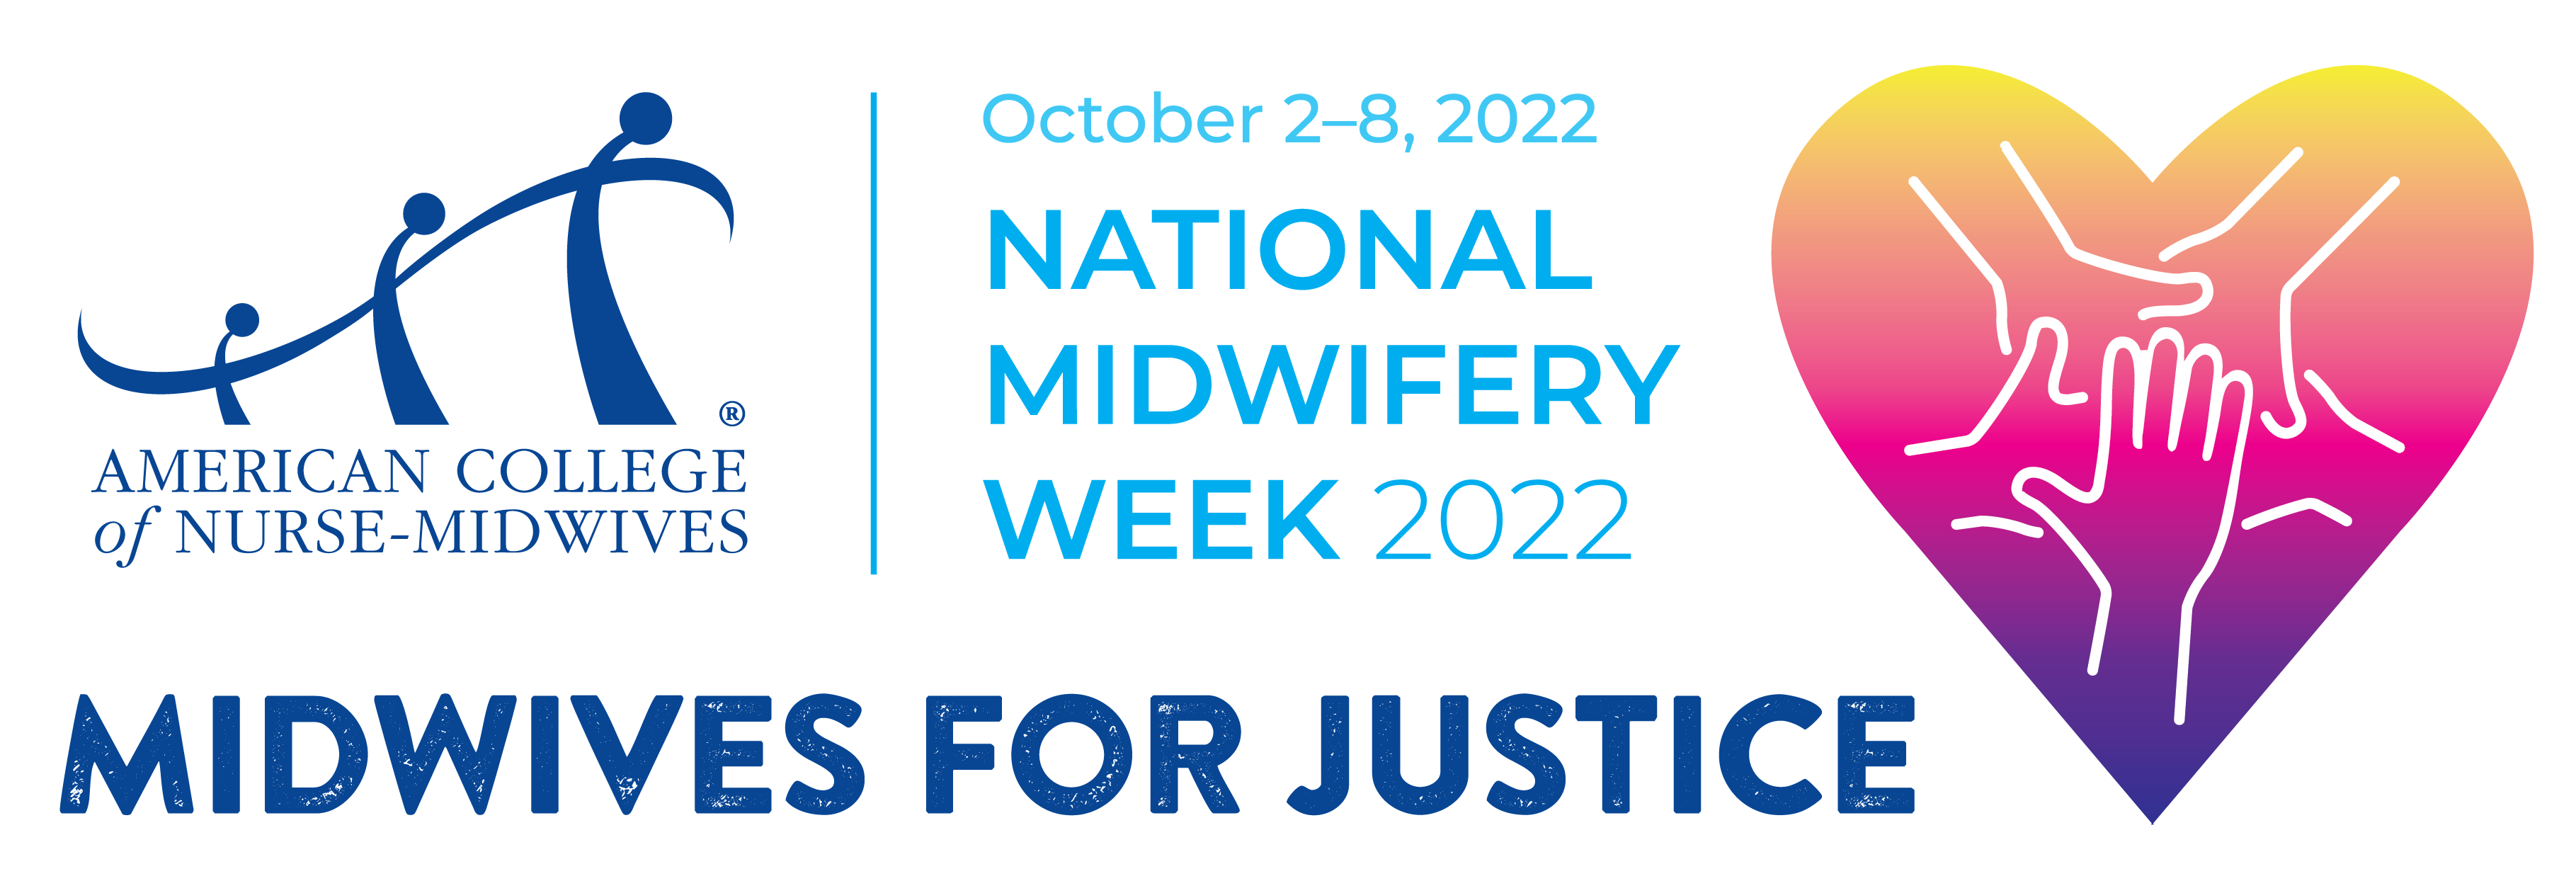 NMW2022 - Midwives for Justice Logo - Horizontal